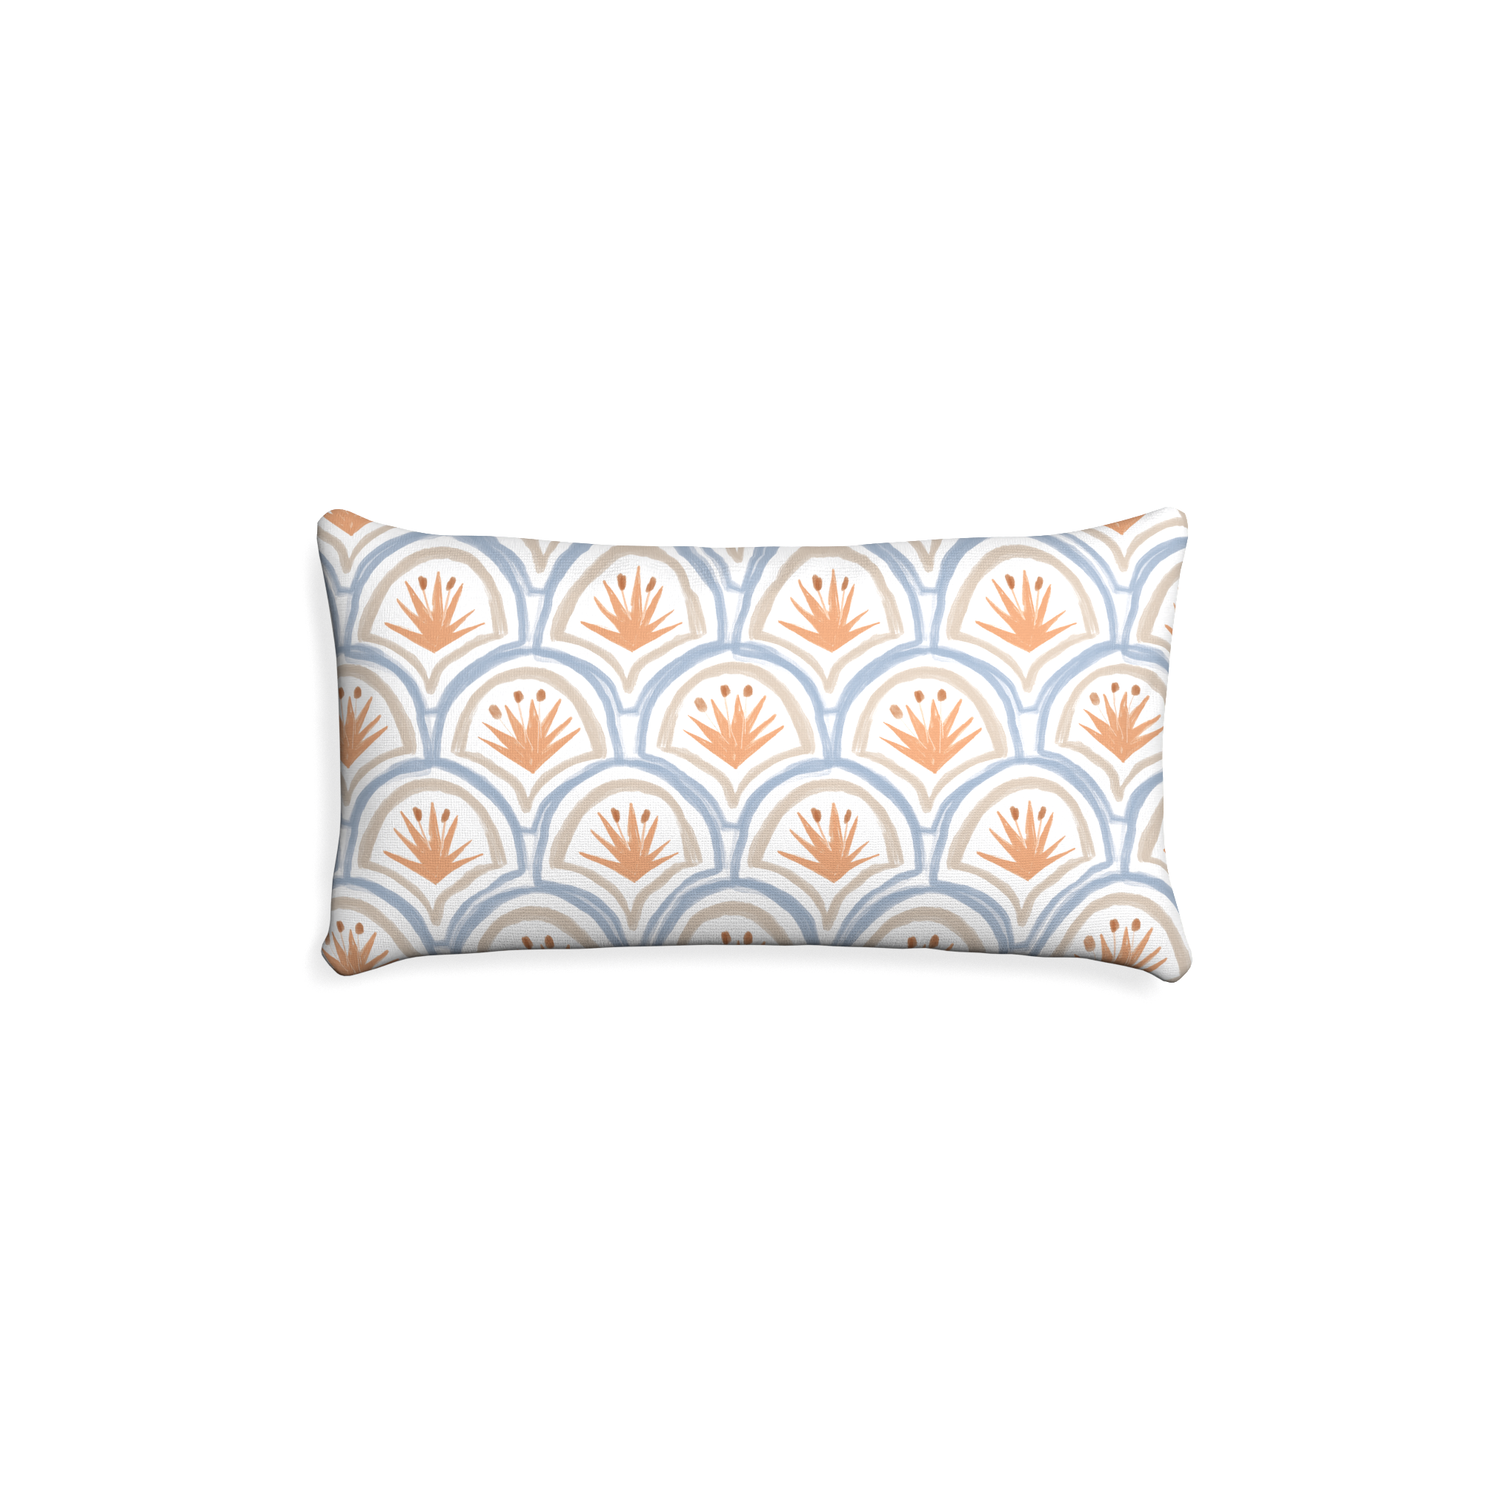 Petite-lumbar thatcher apricot custom art deco palm patternpillow with none on white background